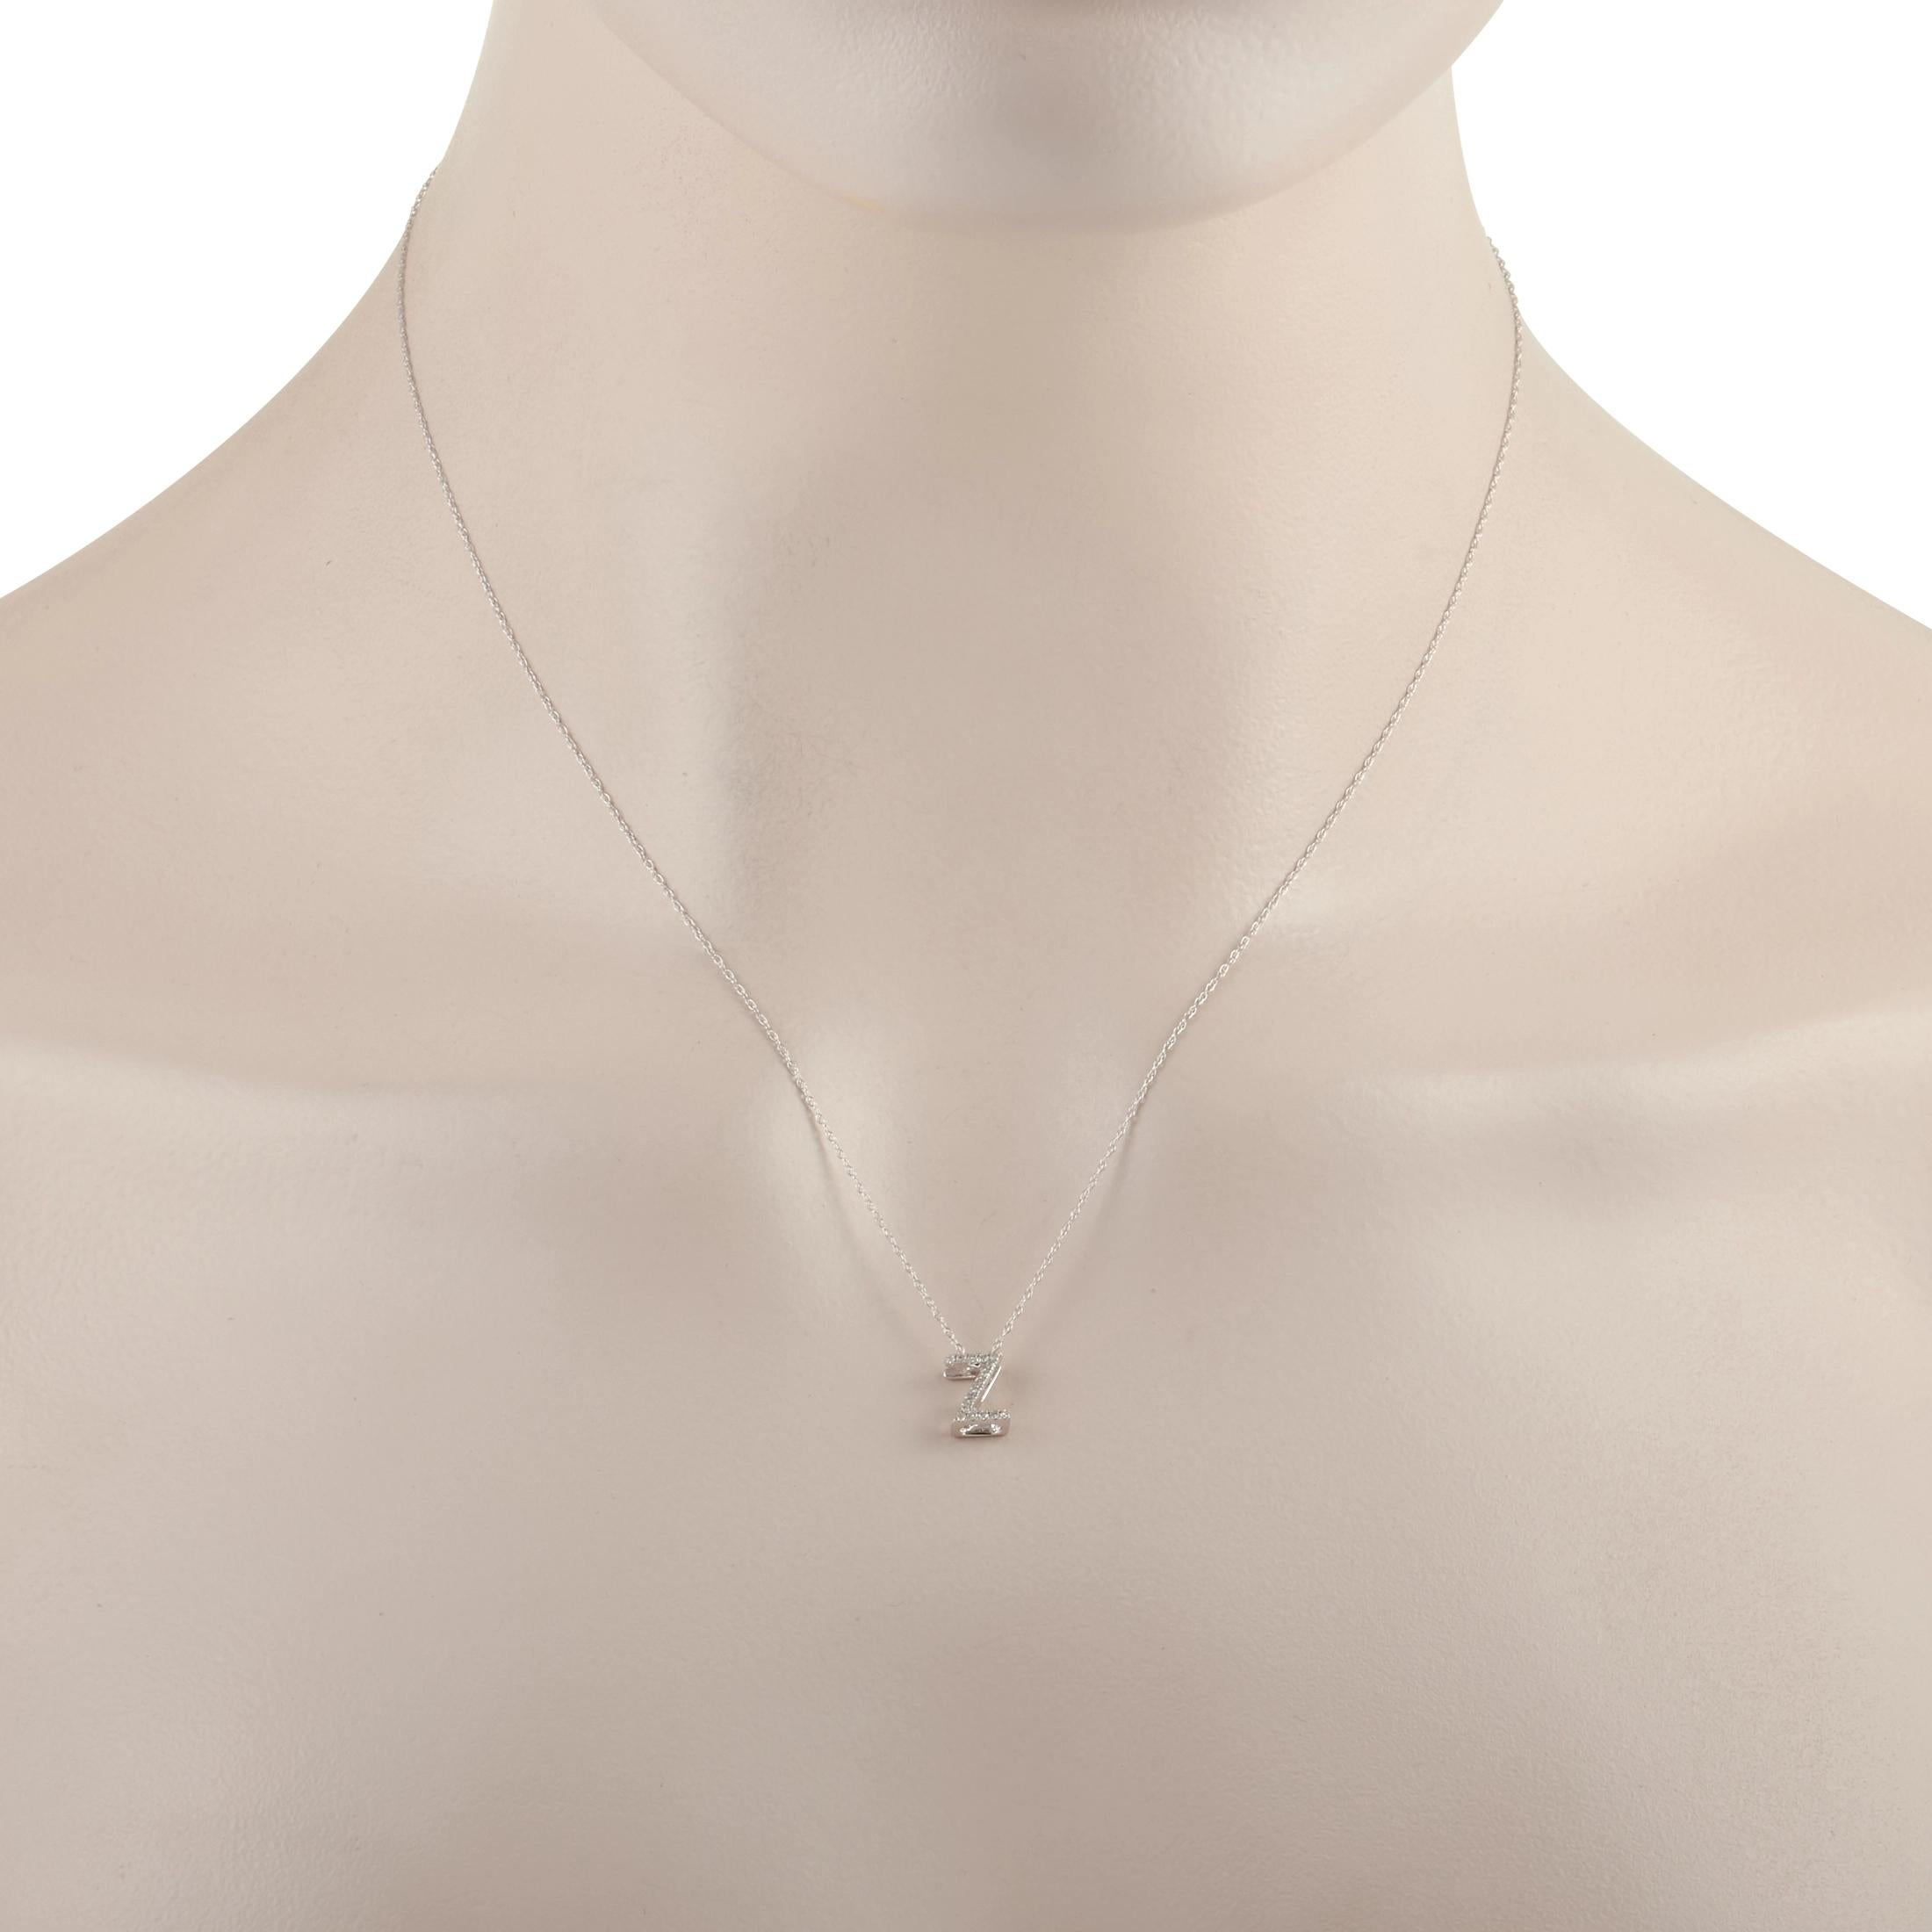 Showing off your monogram is easy when you have this elegant pendant necklace. On the “Z” pendant, you’ll find glittering diamonds with a total weight of 0.10 carats suspended from a 17.5” chain. The pendant measures .32” long .19” wide, and